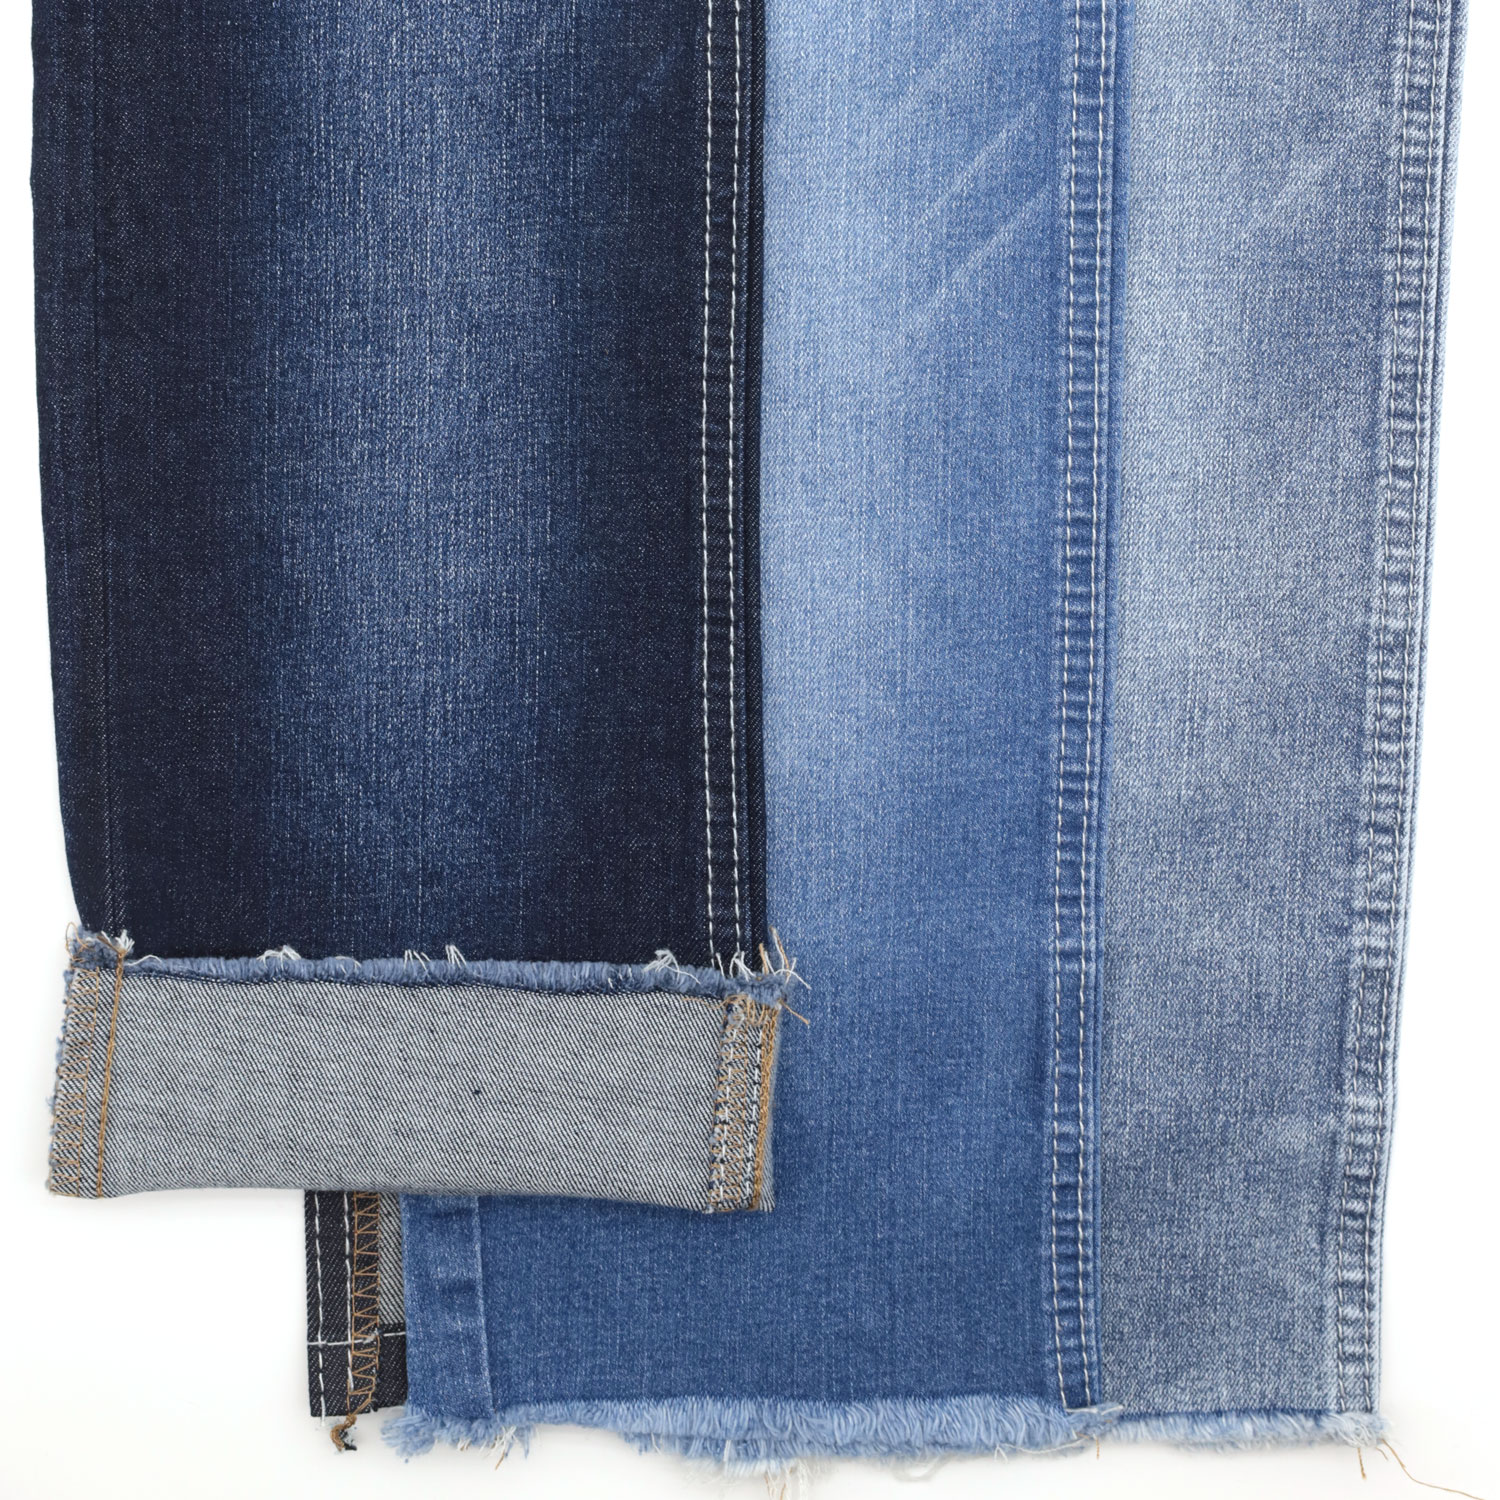 5 Reasons a Stretch Denim Jean Fabric Is Good for You 2